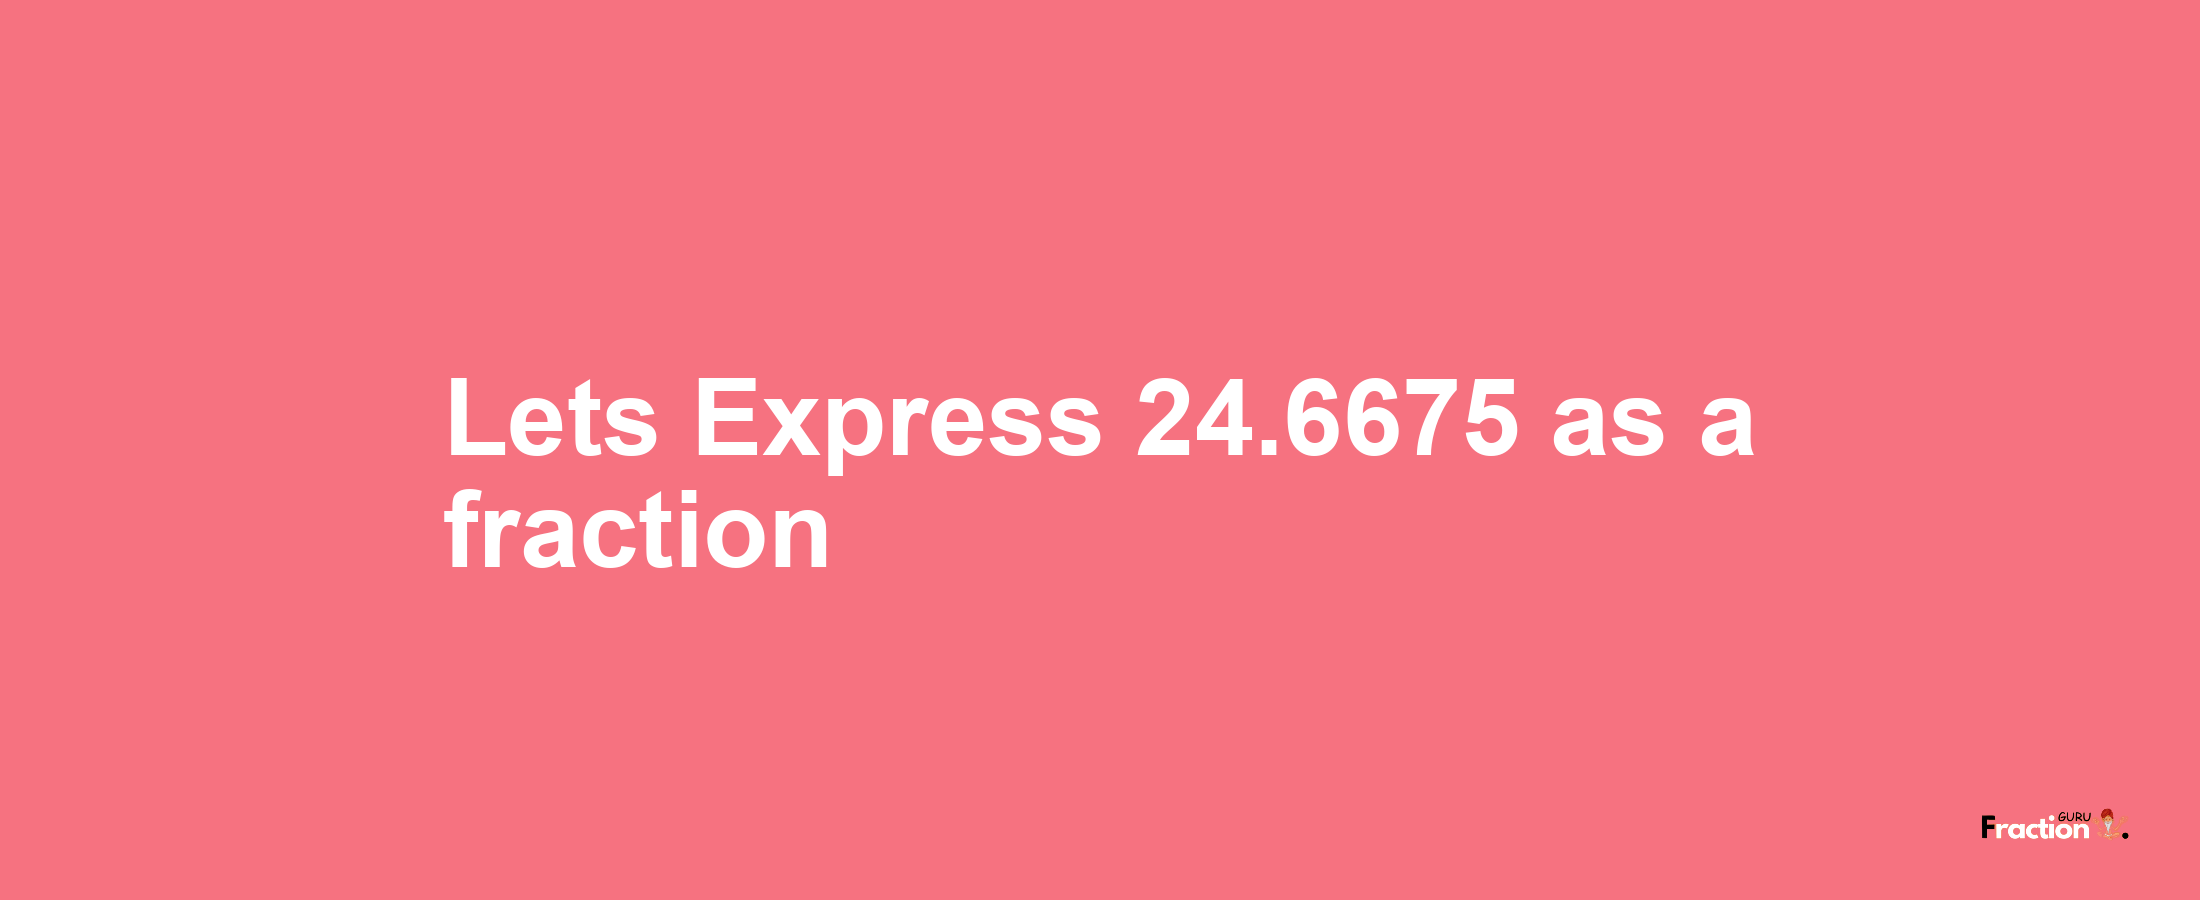 Lets Express 24.6675 as afraction